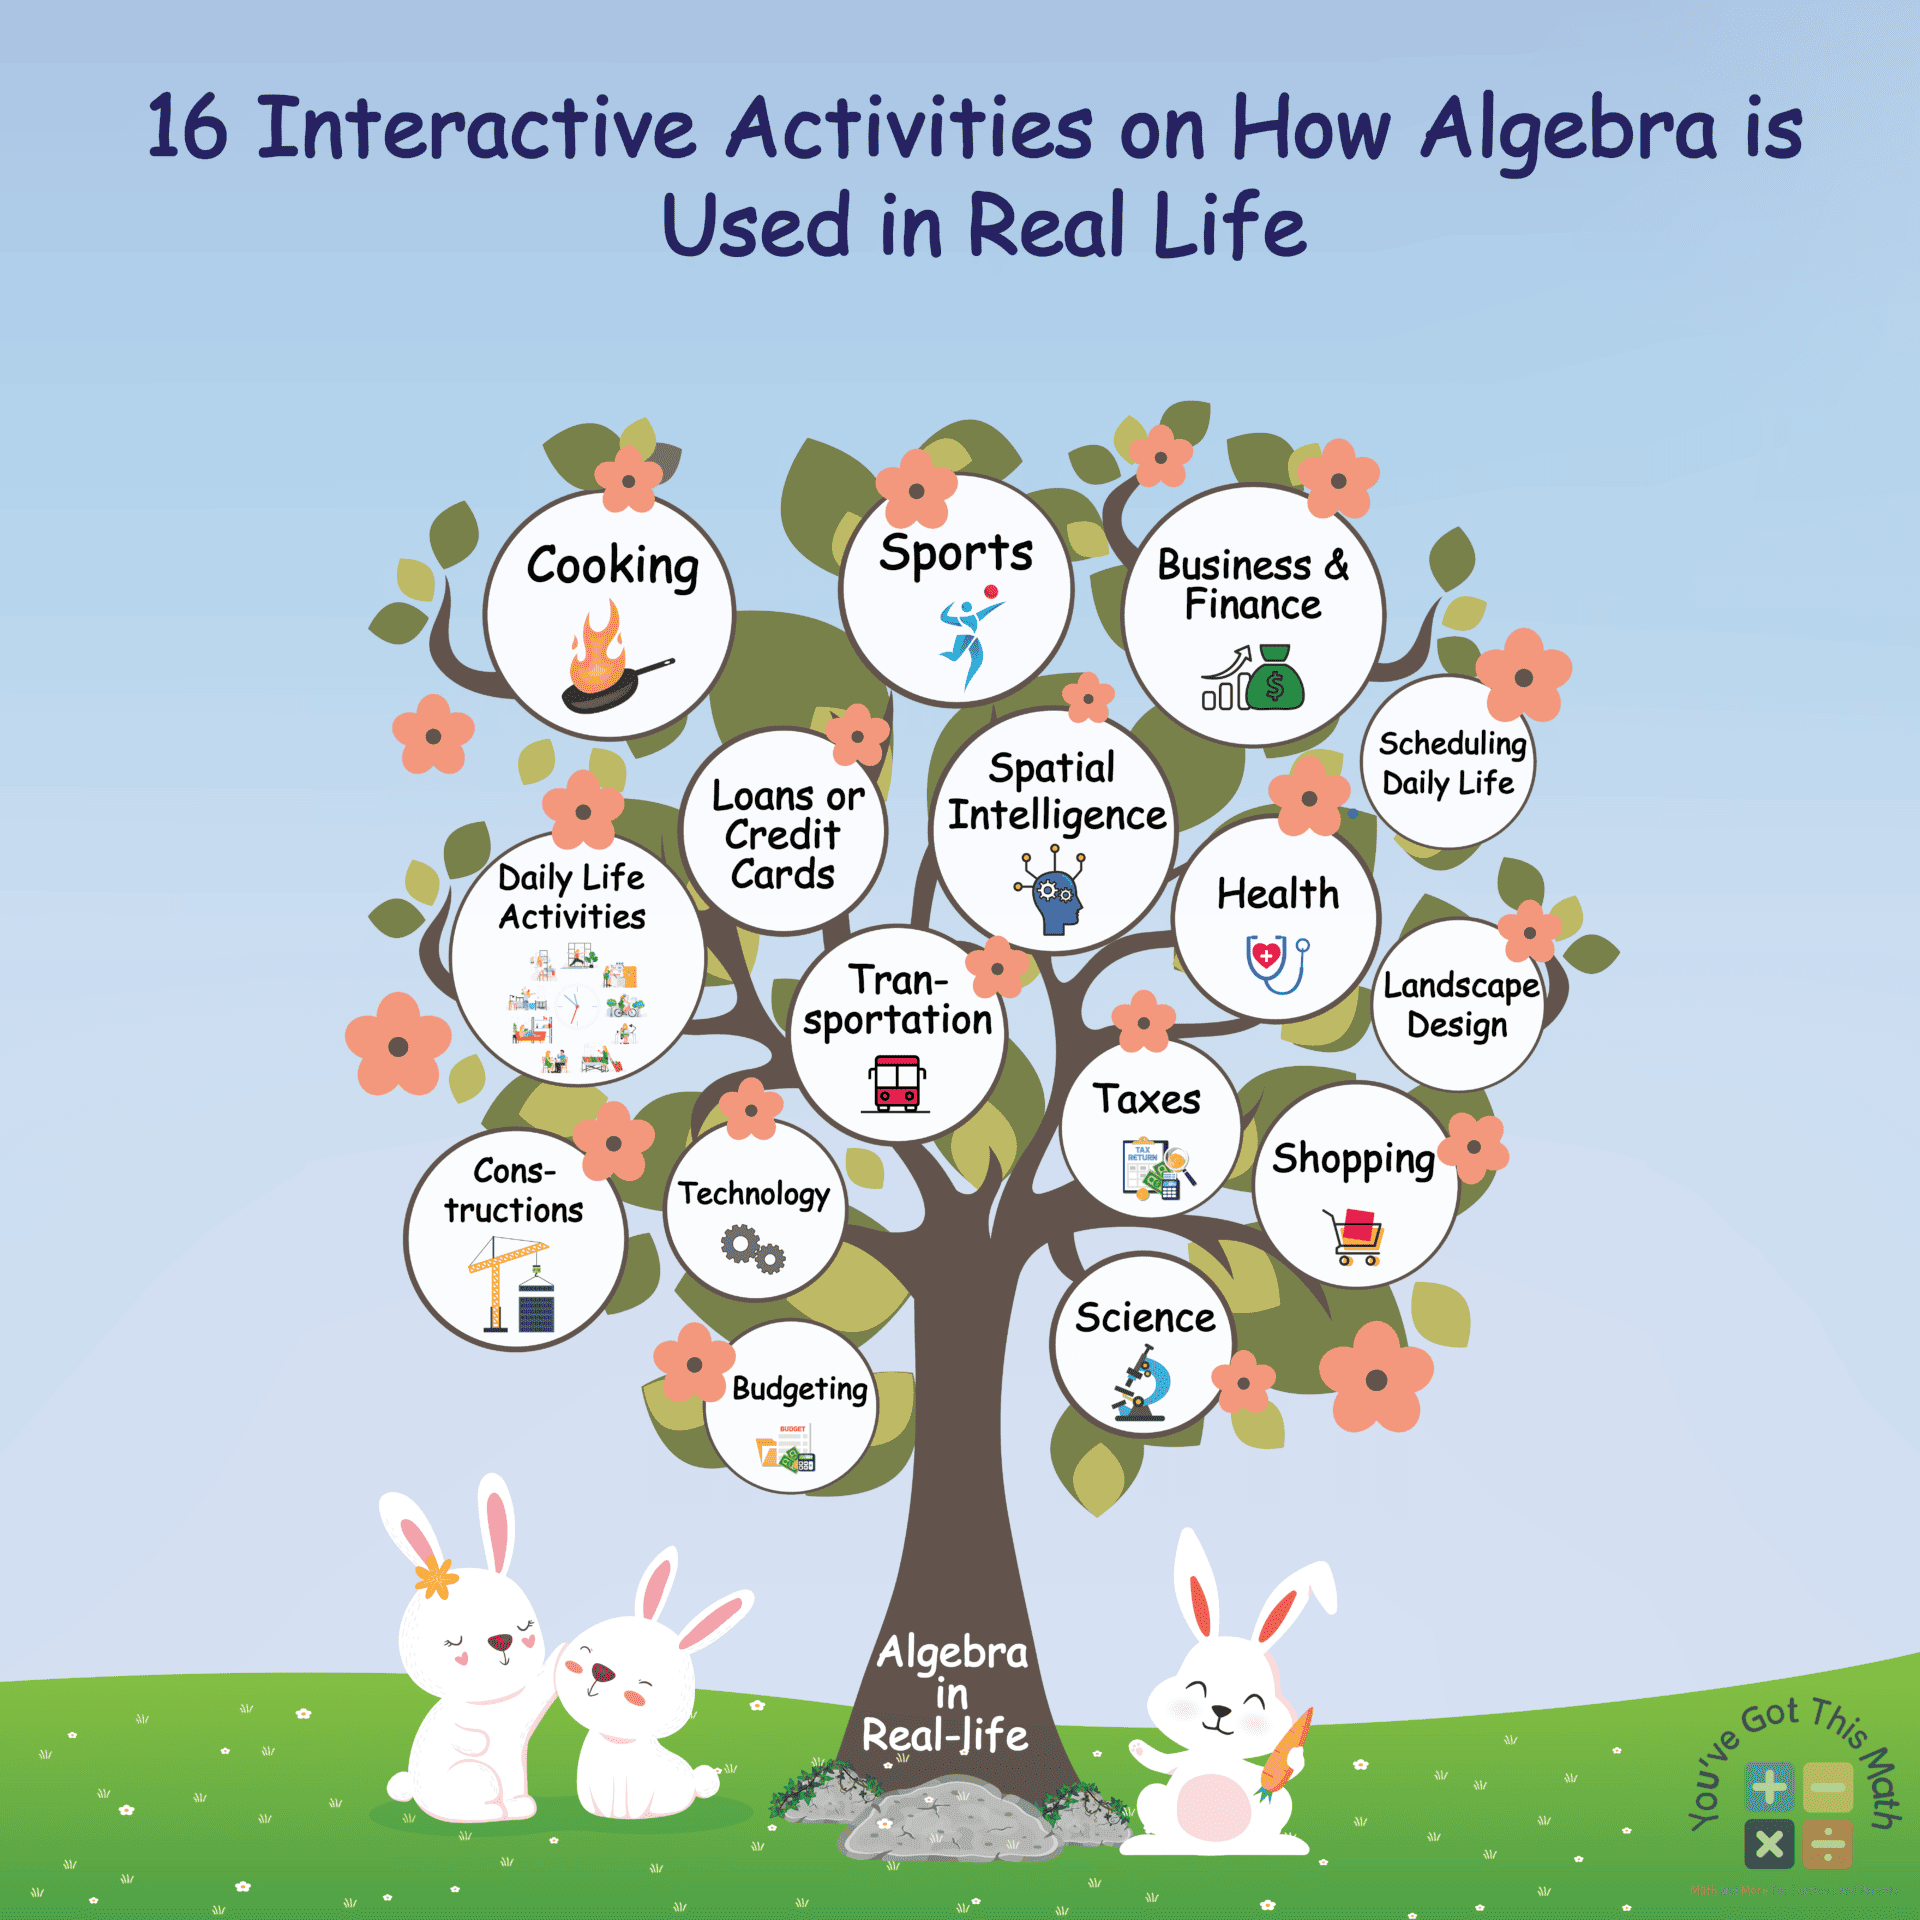 16 Interactive Activities on How Algebra is Used in Real Life